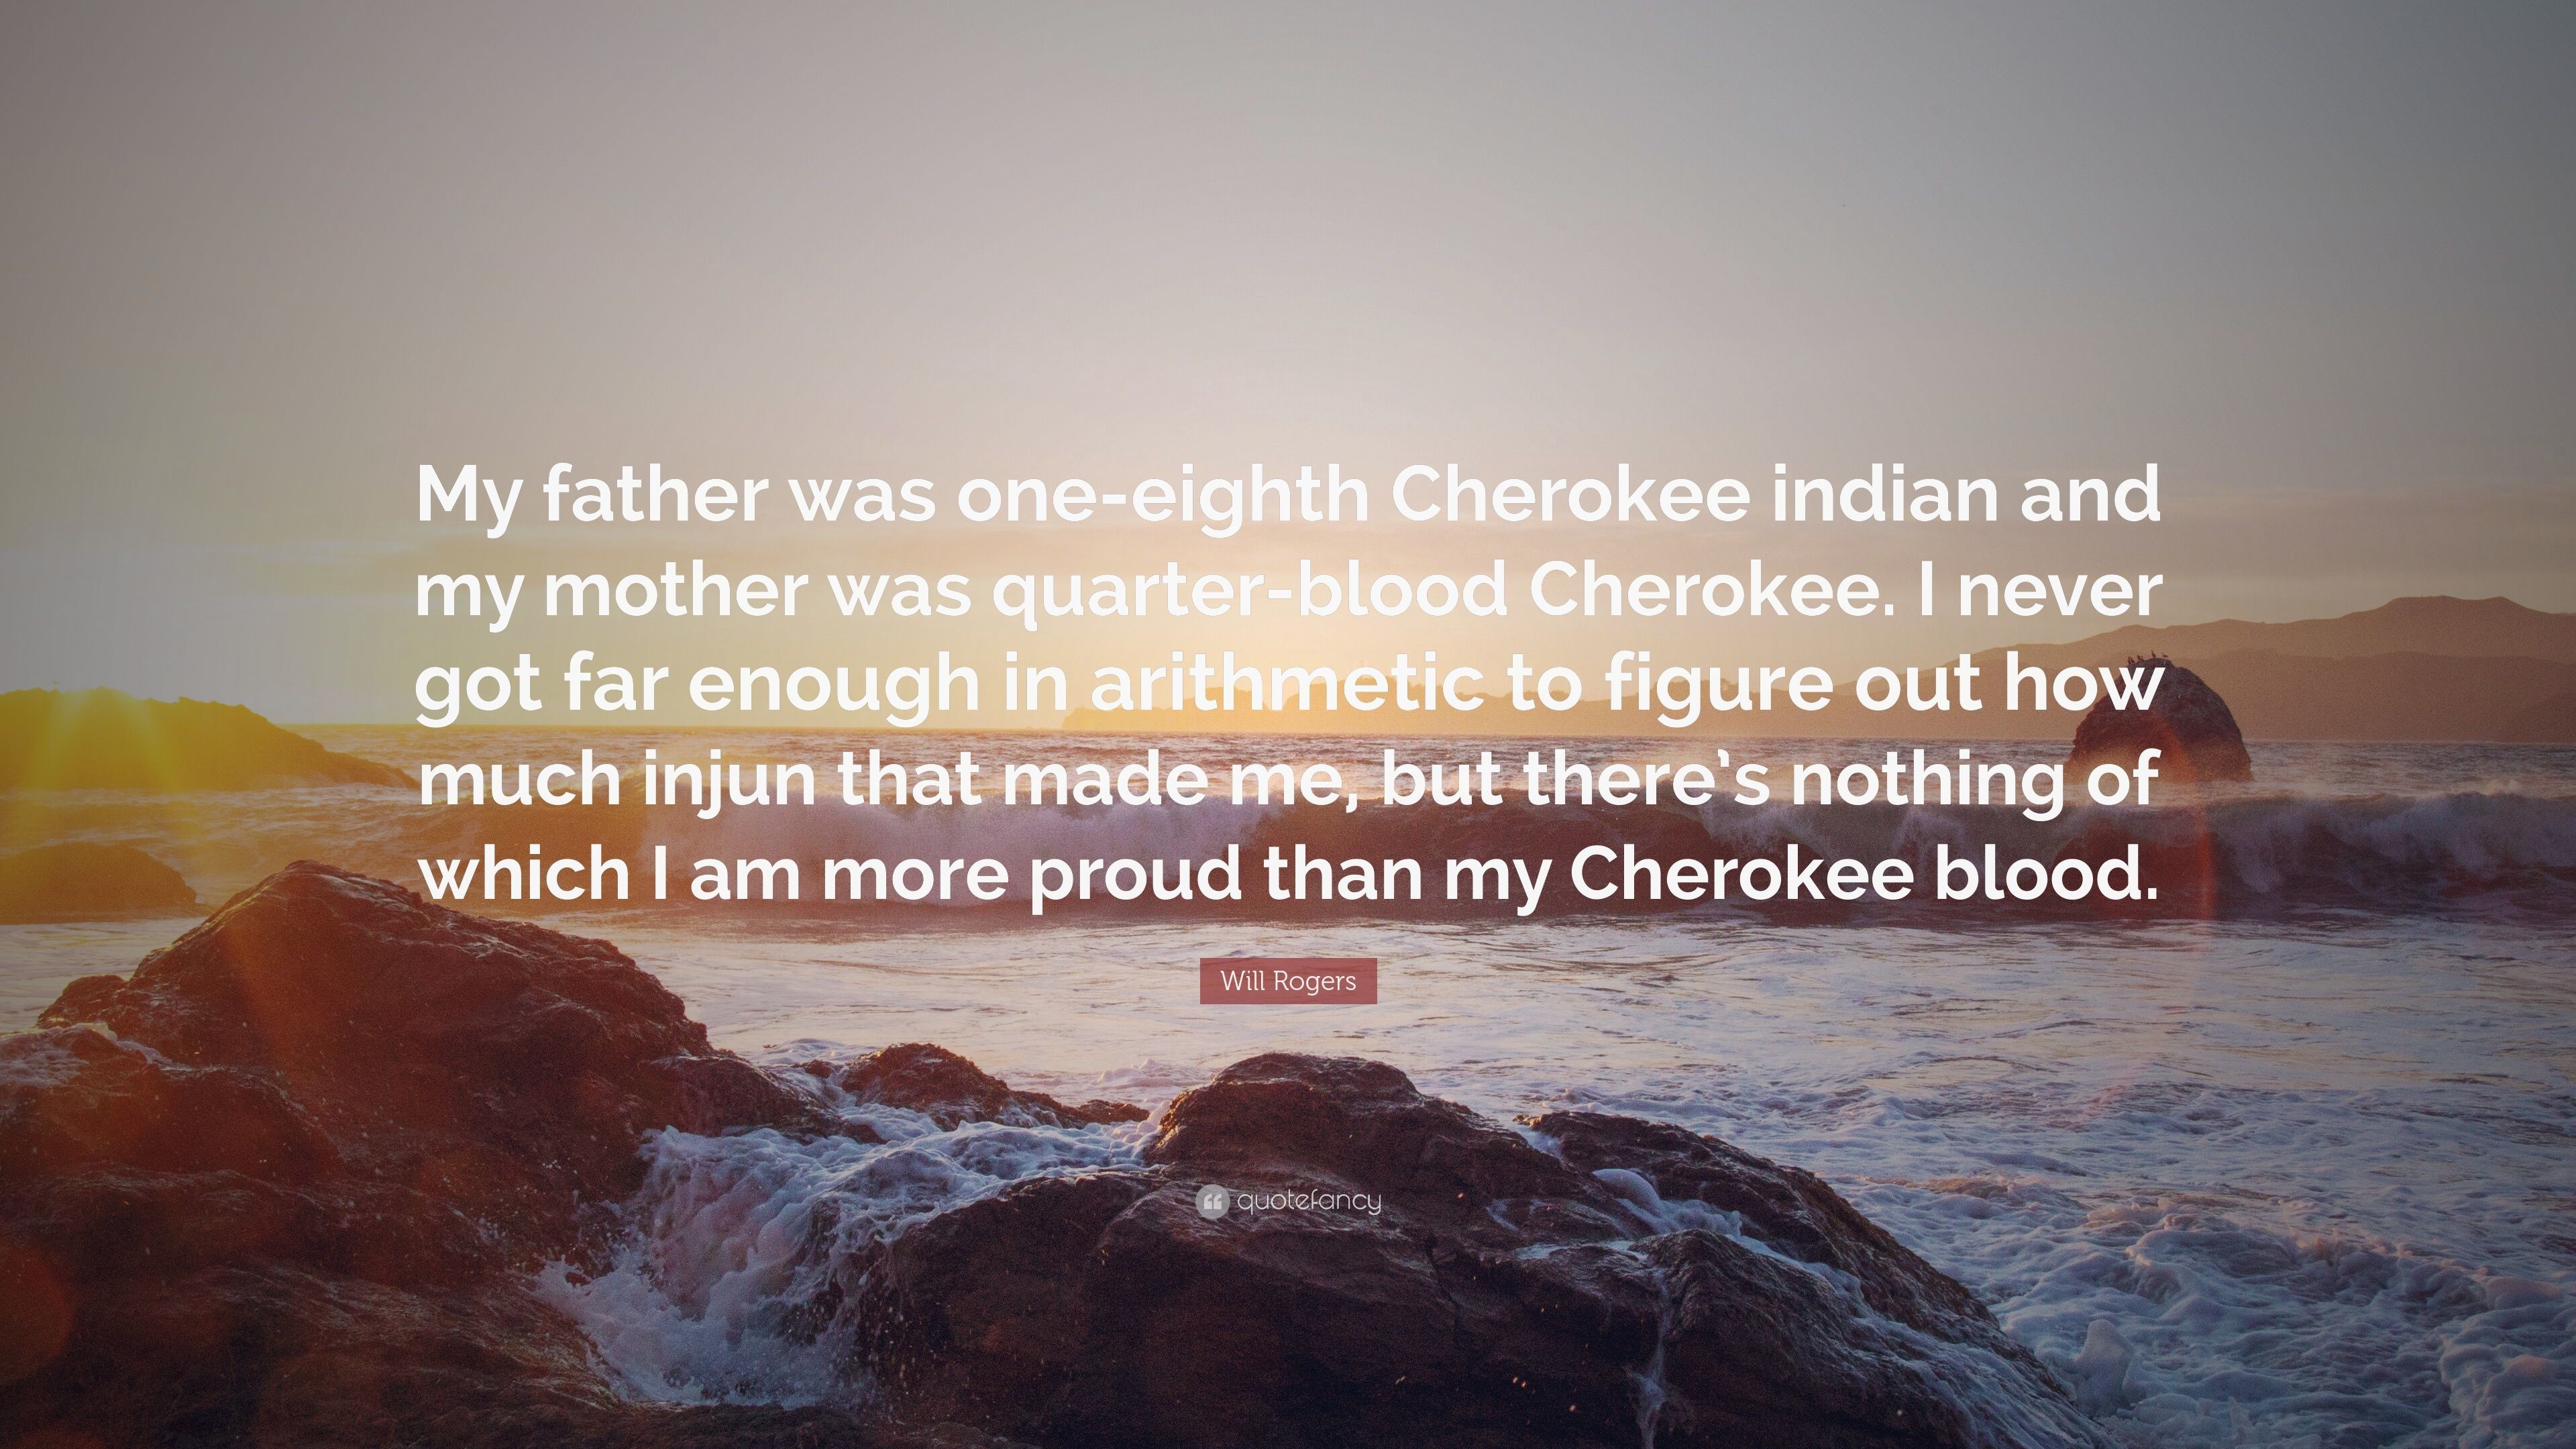 Will Rogers Quote: "My father was one-eighth Cherokee indian and my mo...